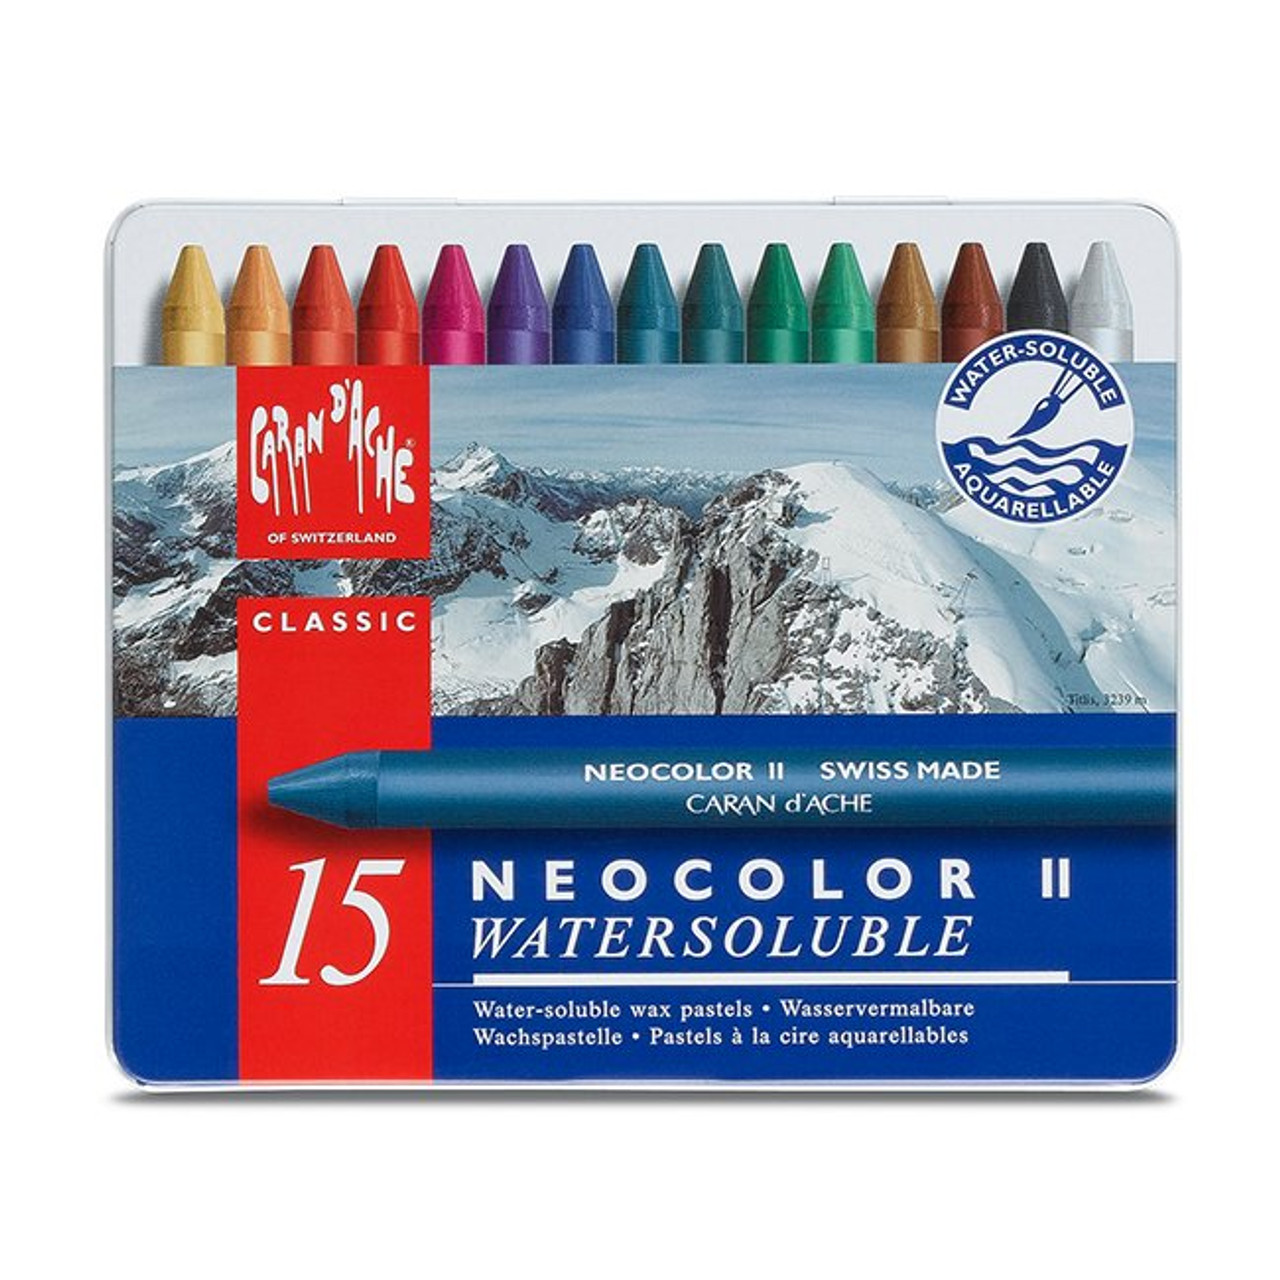 Caran D'Ache Classic Neocolor II Water-Soluble Crayons, 15 Assorted Colors  - Artist & Craftsman Supply